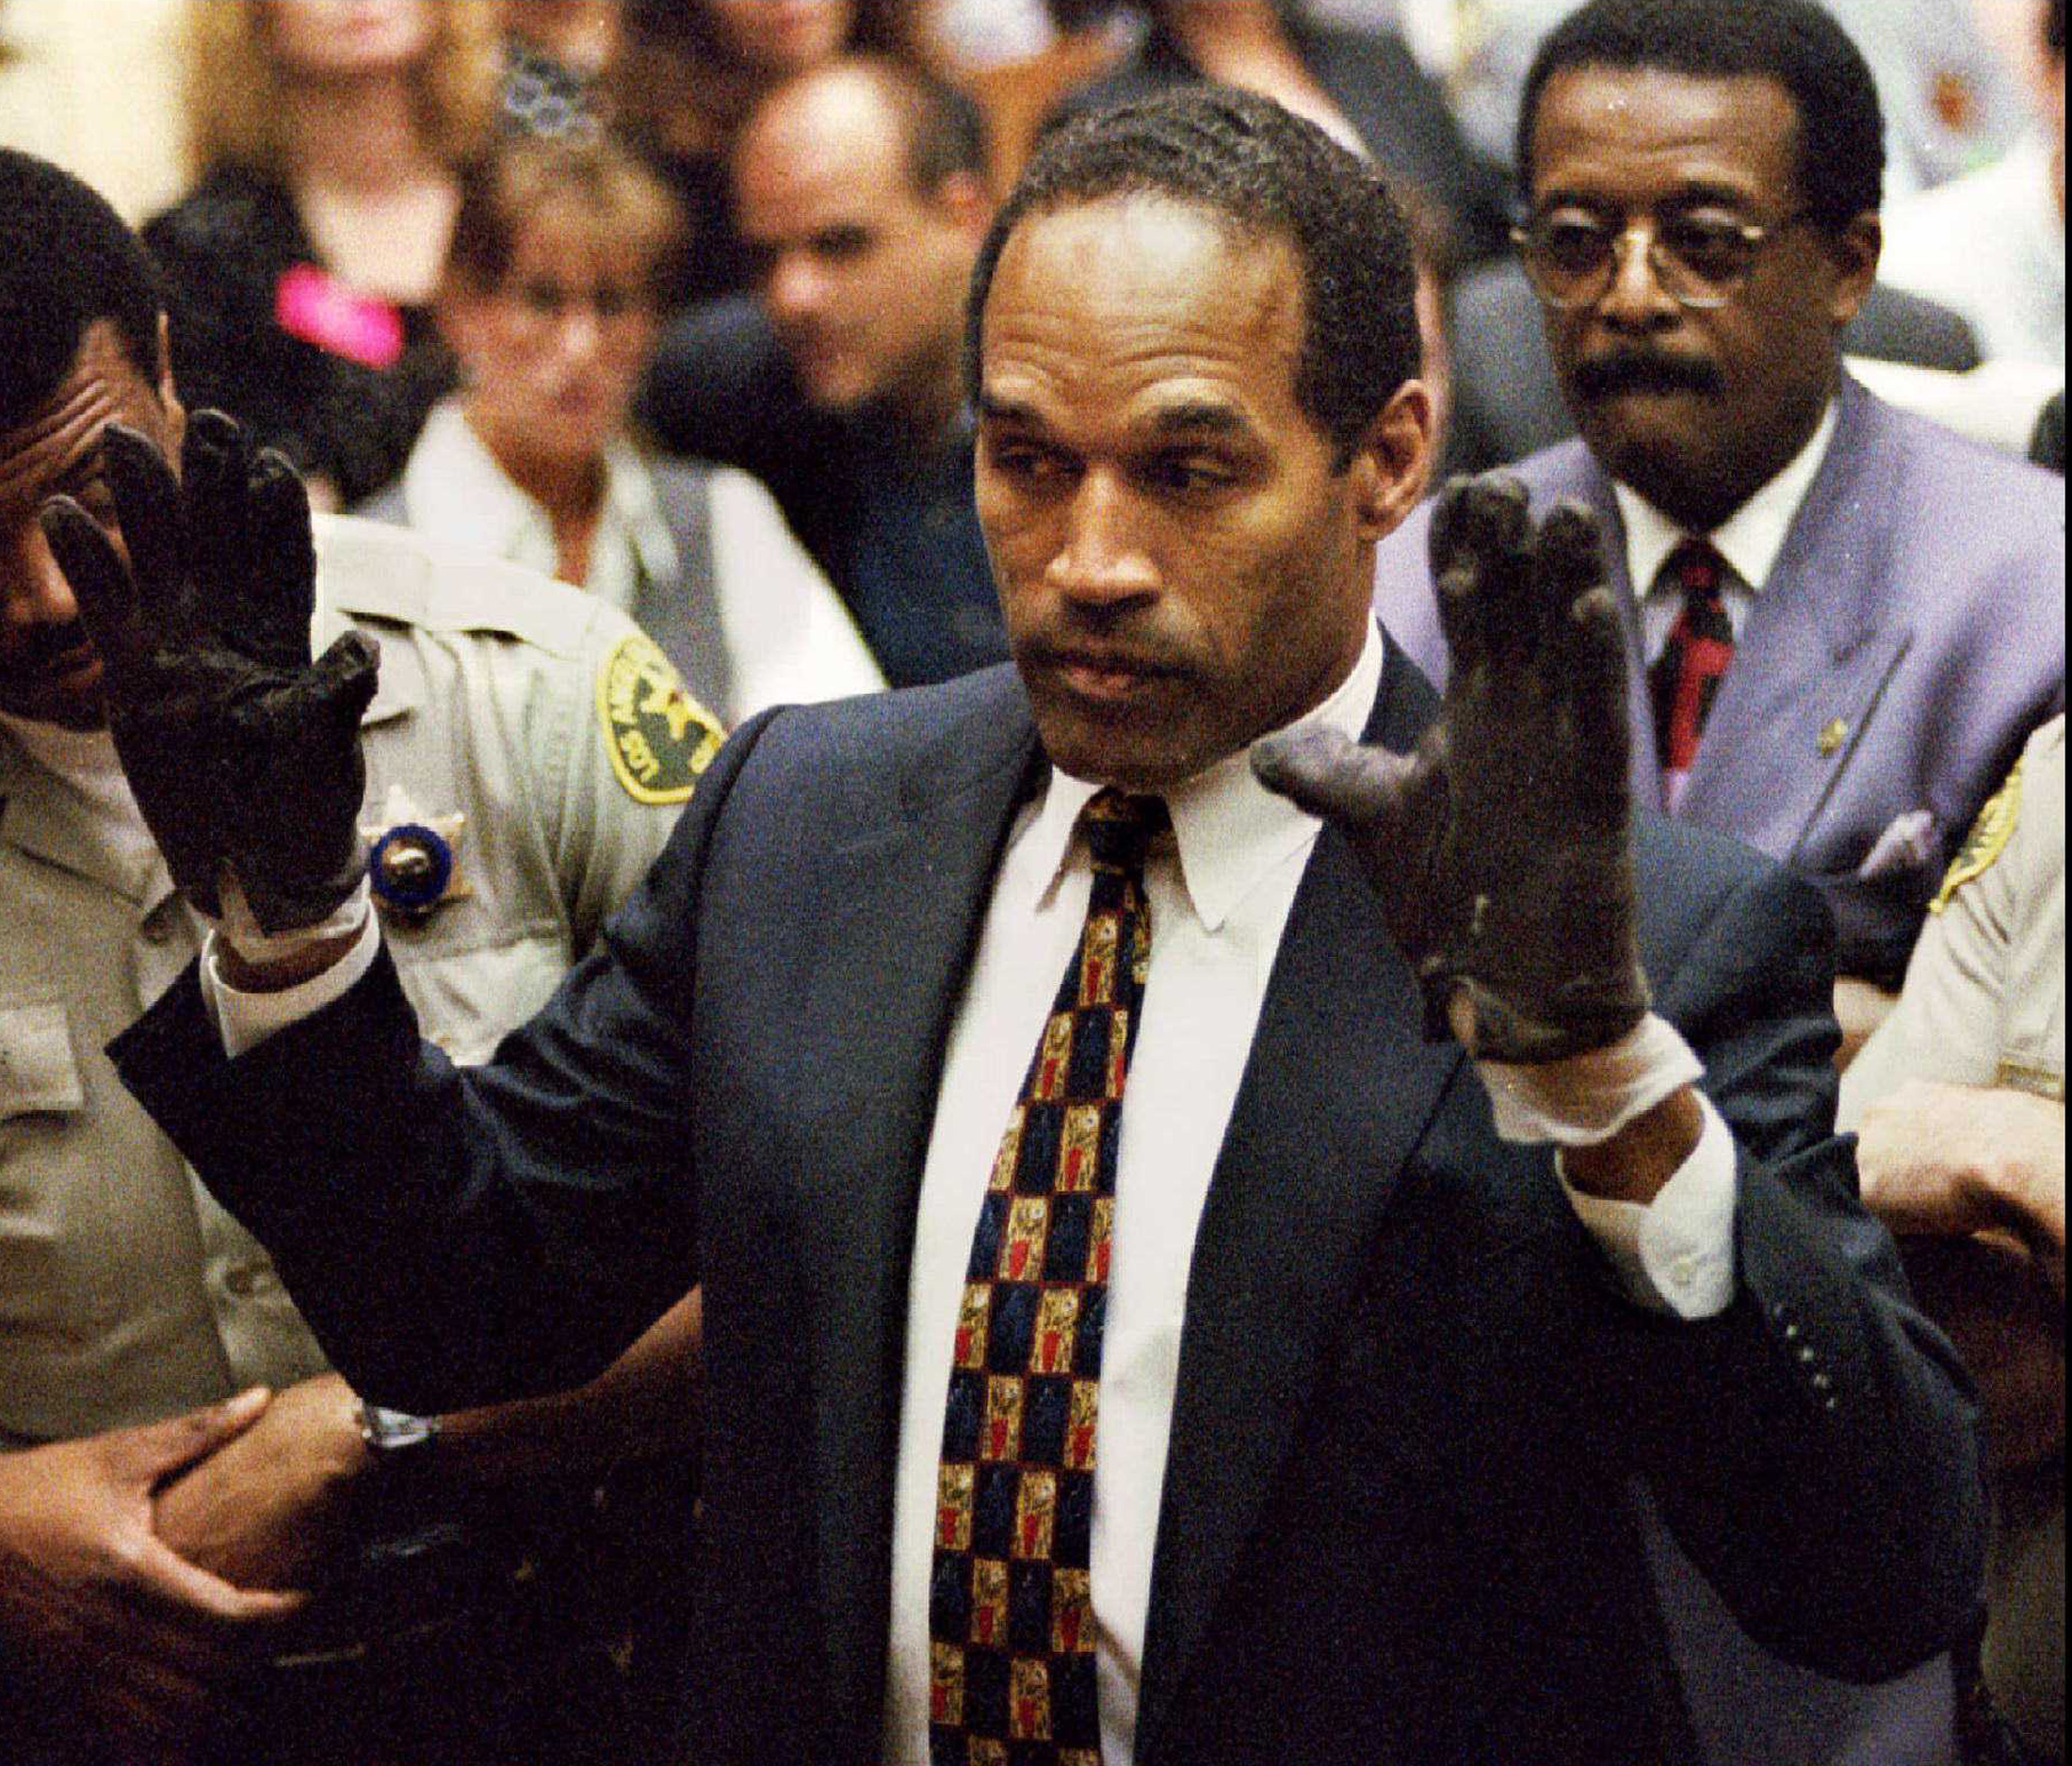 File photo shows OJ Simpson and Los Angeles attorney Johnnie ...